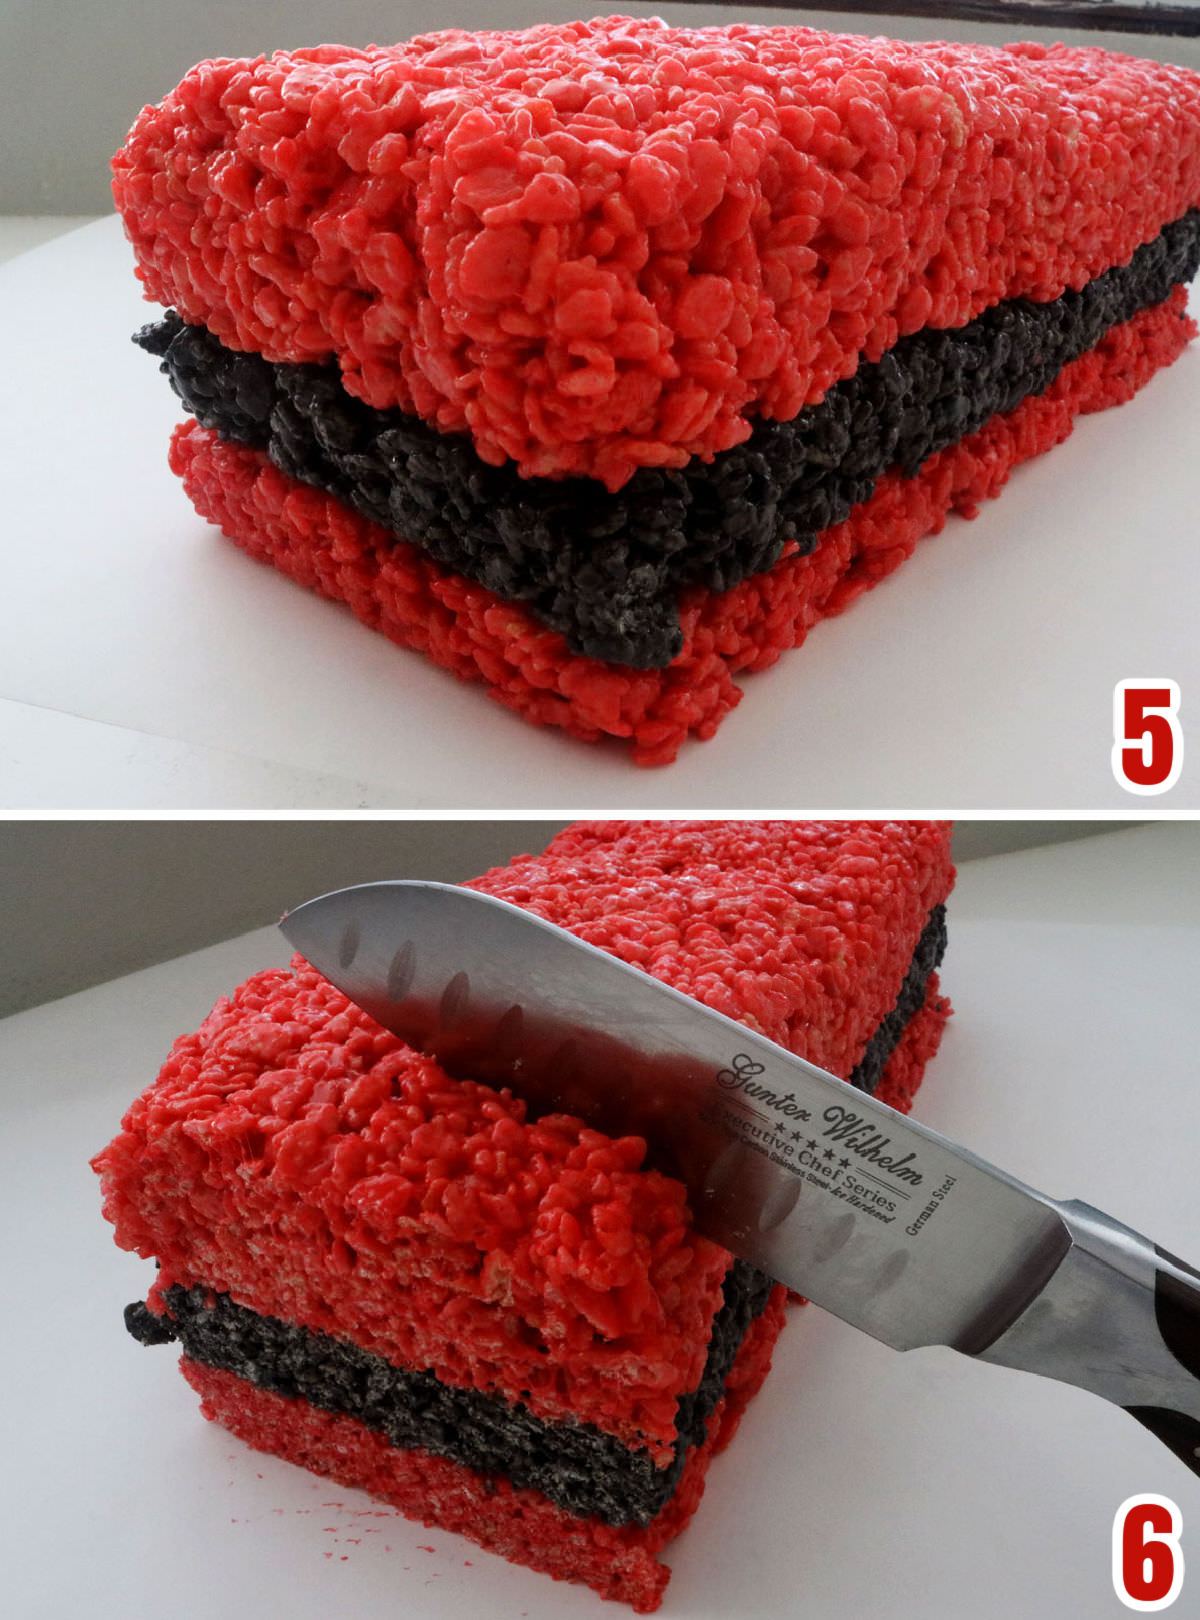 Collage image showing how to create a loaf from the three layers of Rice Krispie Treat strips.